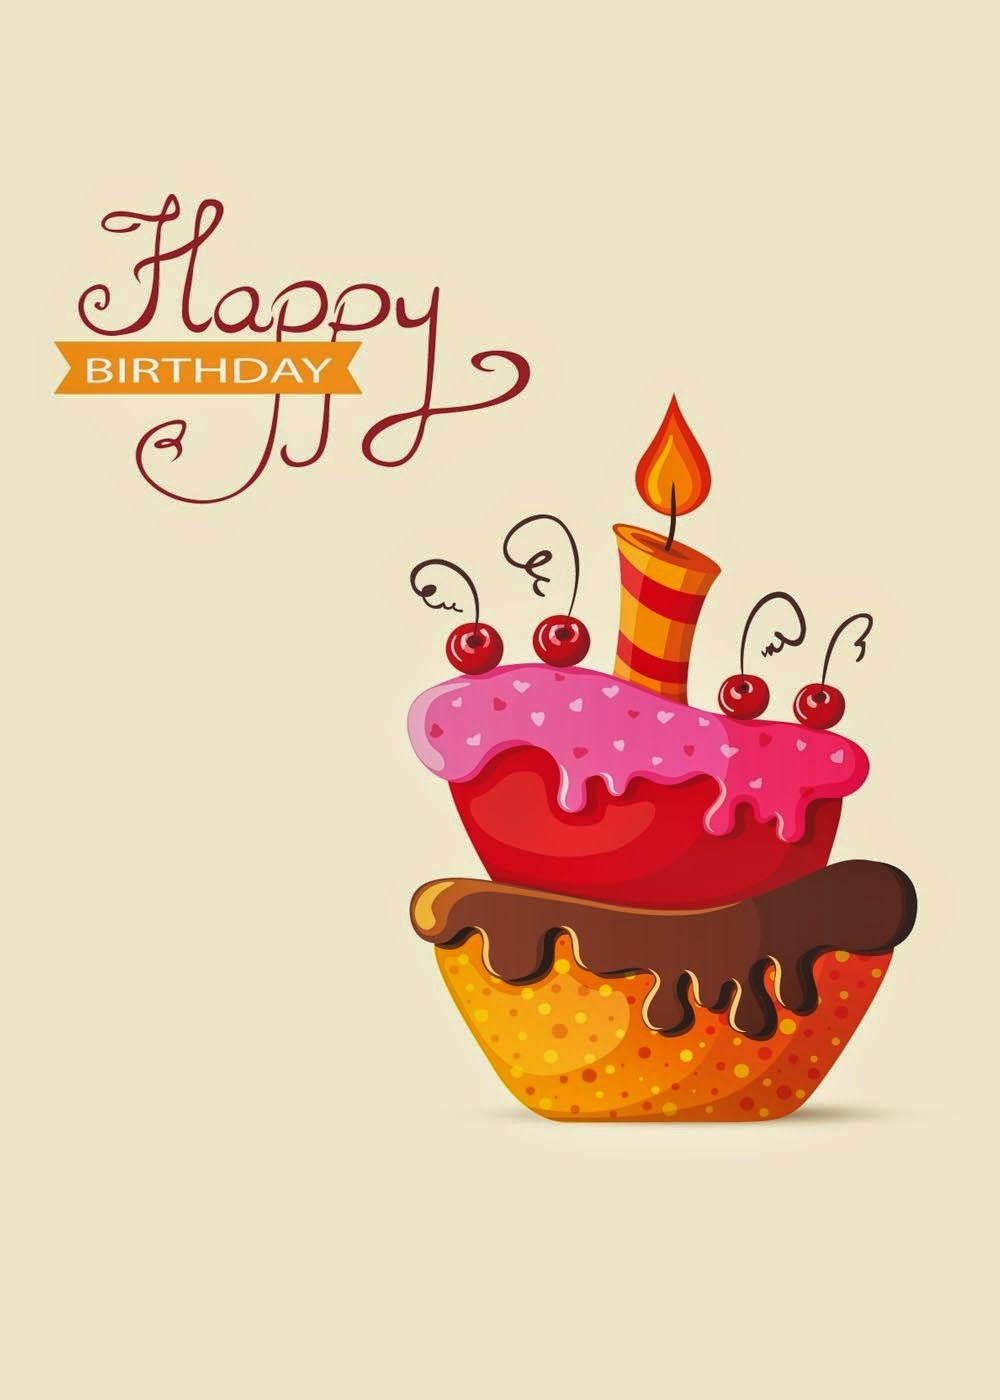 Cool Happy Birthday Wishes
 Happy Birthday Wishes Greetings Cards 2015